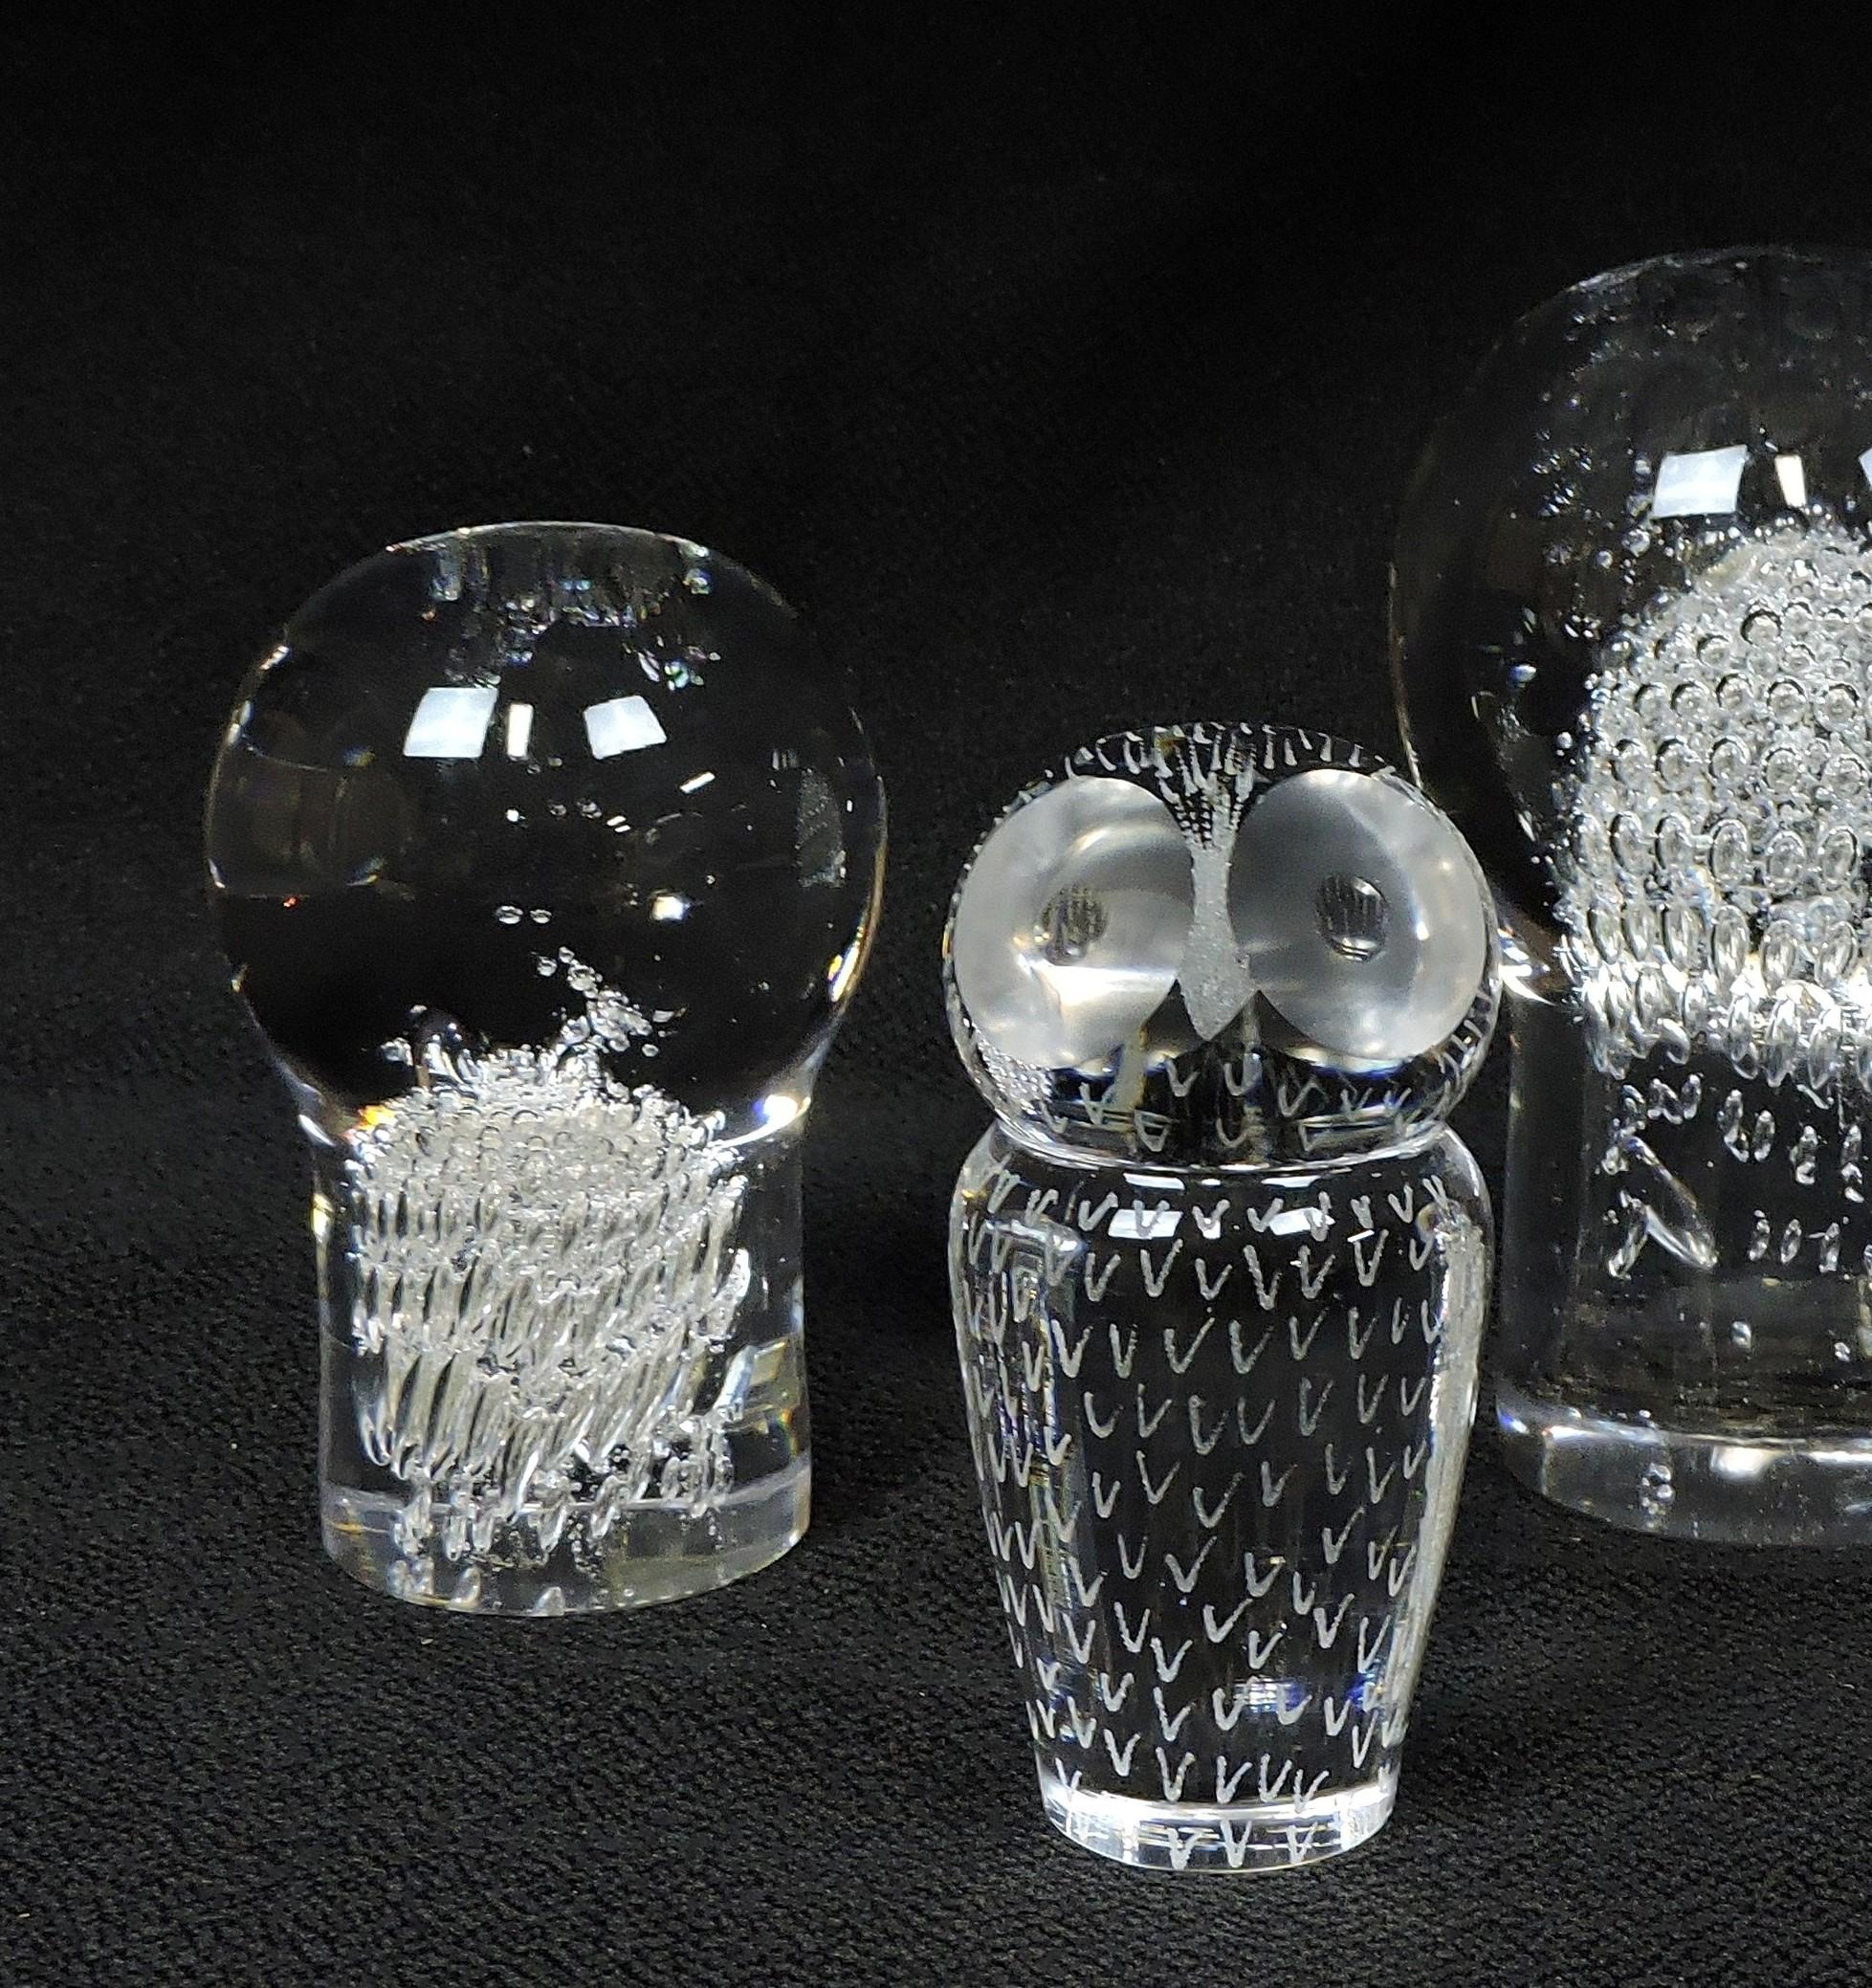 Set of two hand blown clear crystal paperweights by Kosta Boda, Sweden. This set includes one mushroom paperweight designed by Goran Warff, and one owl paperweight designed by Vicke Lindstrand. Both are signed and numbered and the mushroom is also